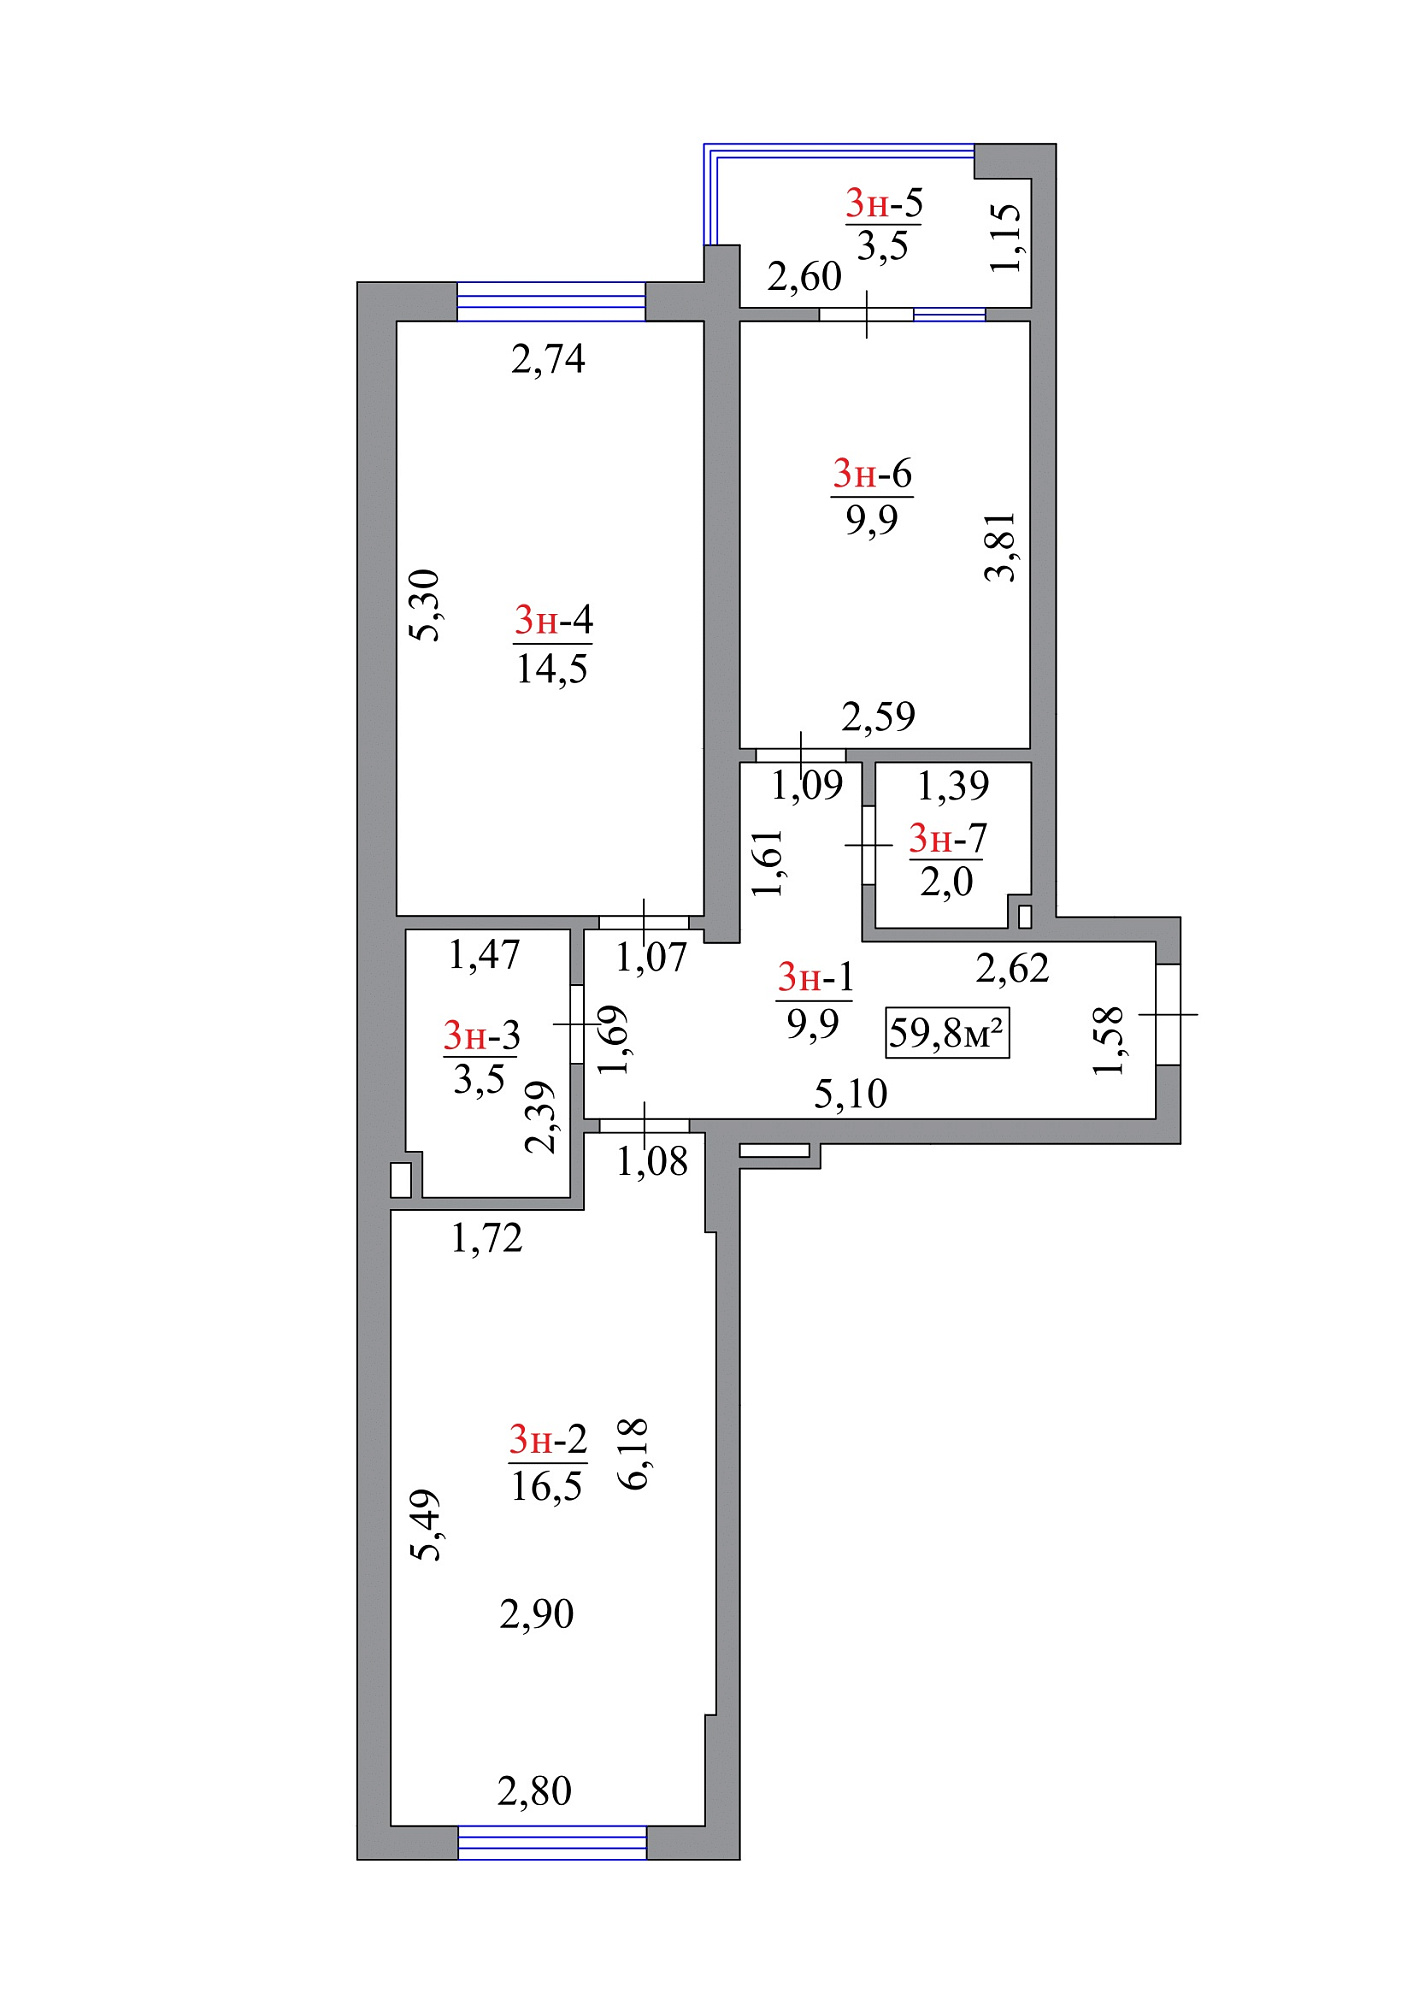 Planning 2-rm flats area 59.8m2, AB-07-01/00003.